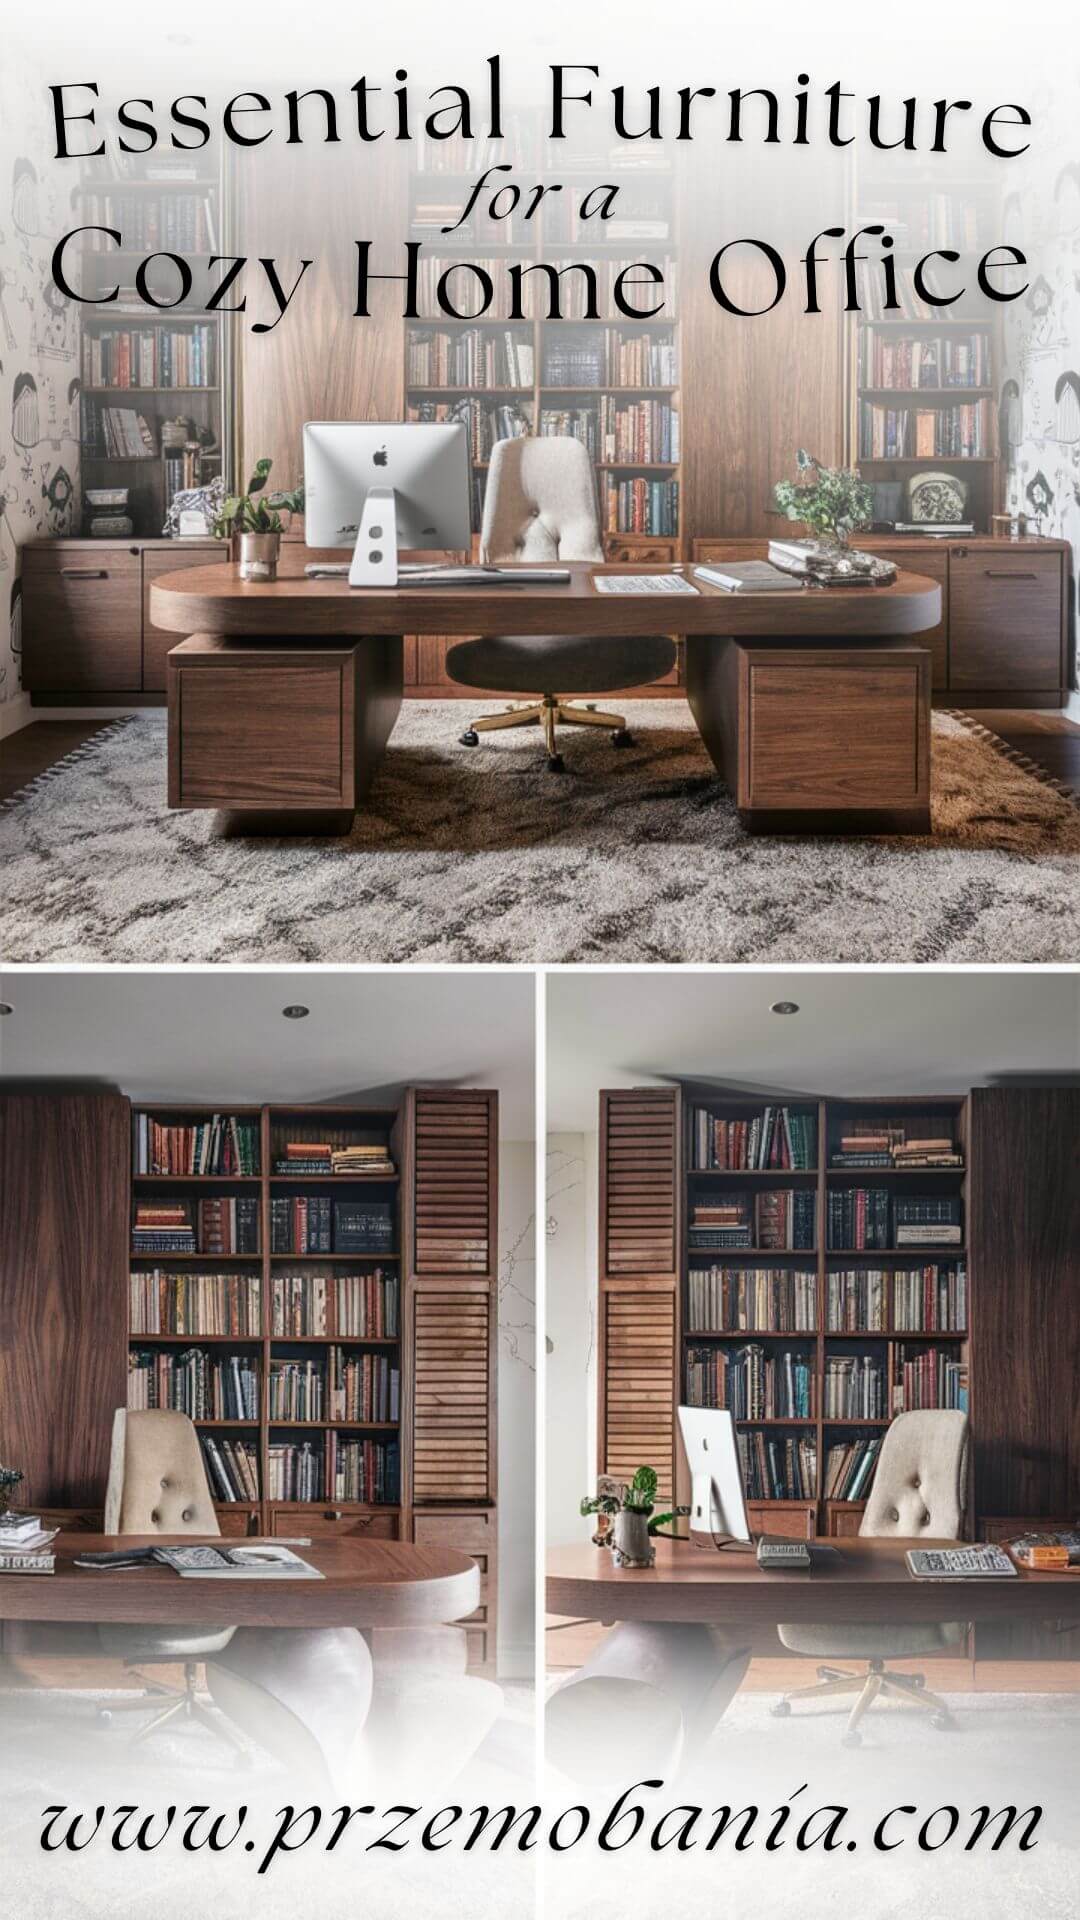 Essential Furniture for a Cozy Home Office 5